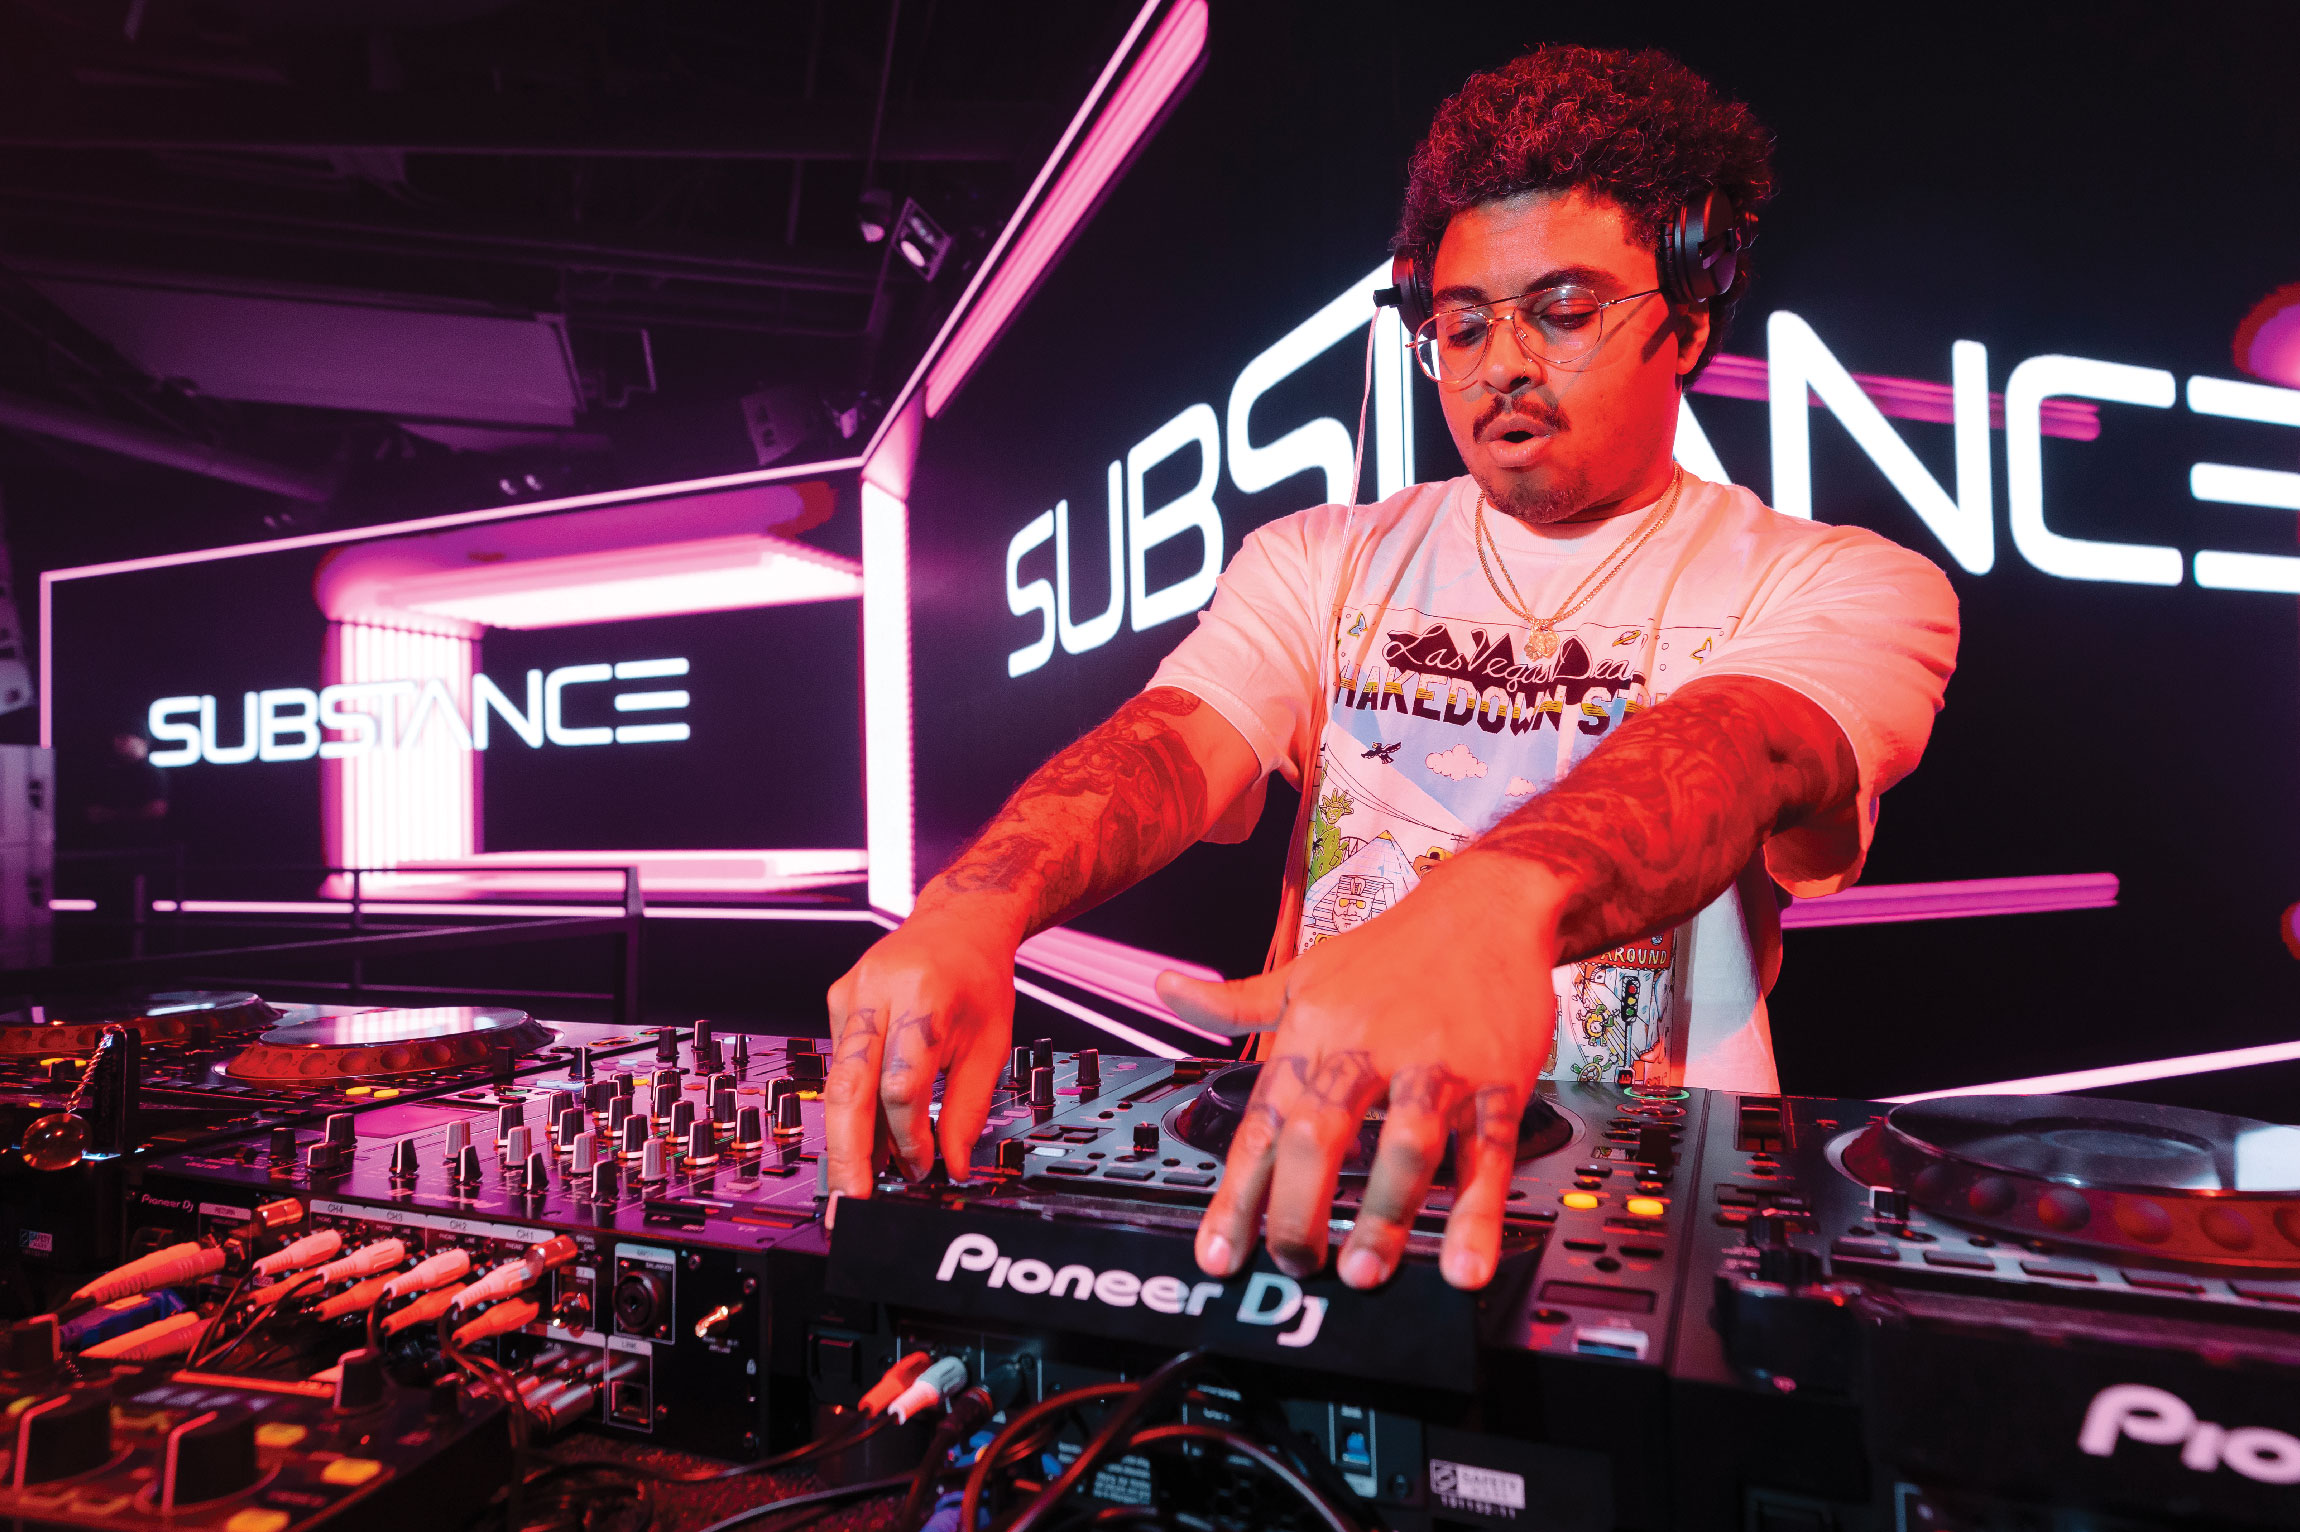 The new club Substance in downtown Las Vegas offers locals a strip experience